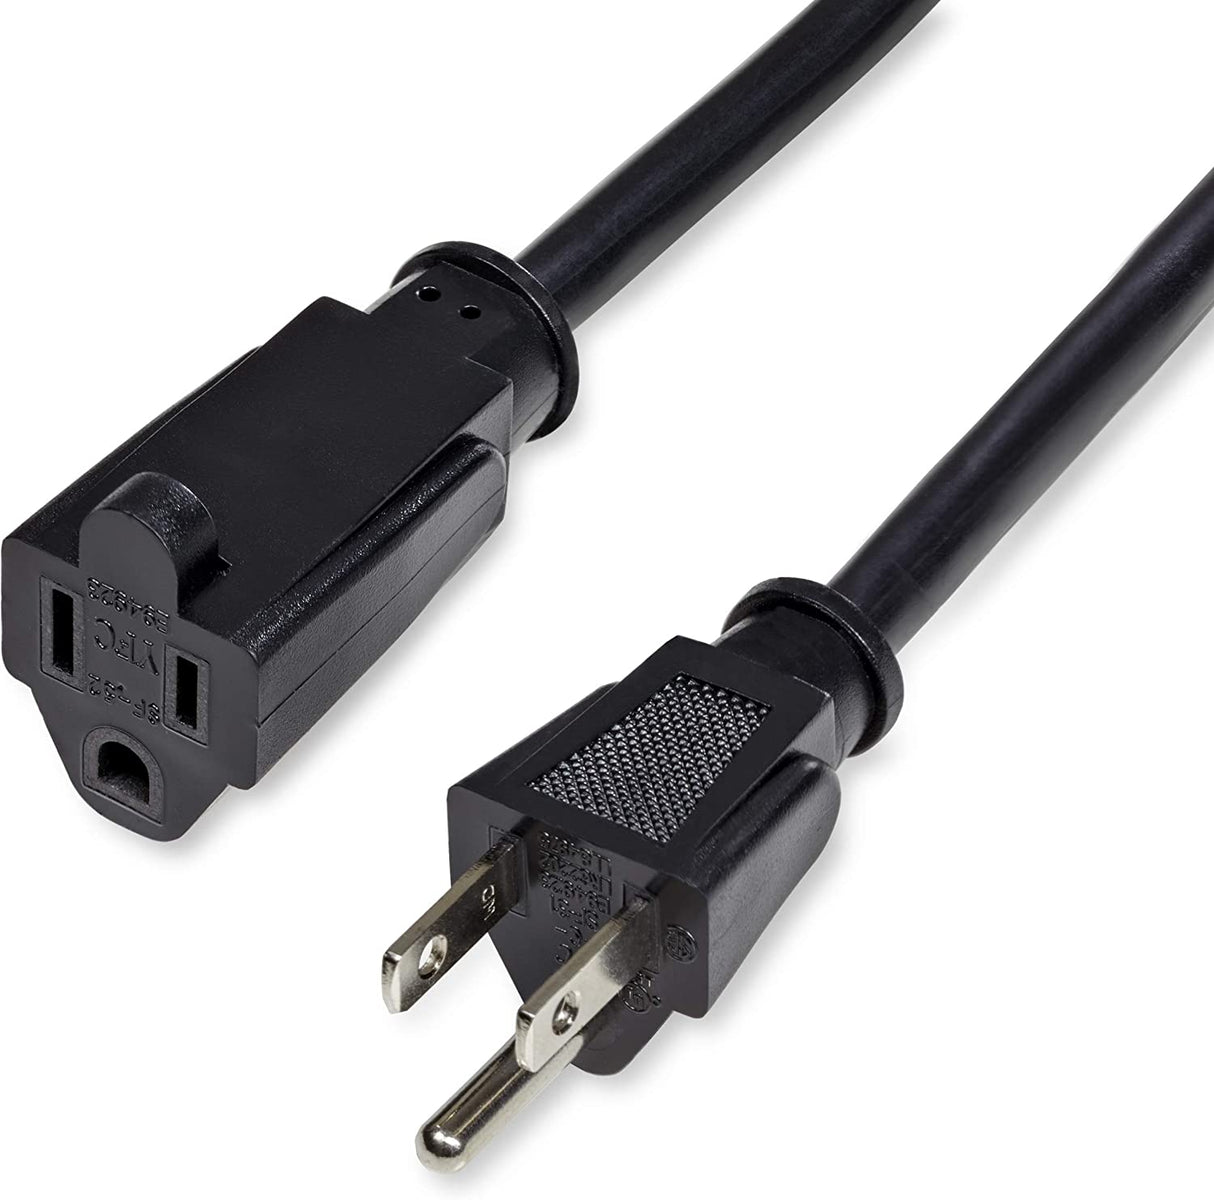 StarTech.com 10ft (3m) Power Extension Cord, NEMA 5-15R to NEMA 5-15P Black Extension Cord, 13A 125V, 16AWG, Outlet Extension Power Cable, NEMA 5-15R to NEMA 5-15P AC Power Cord - UL Listed (PAC10110)